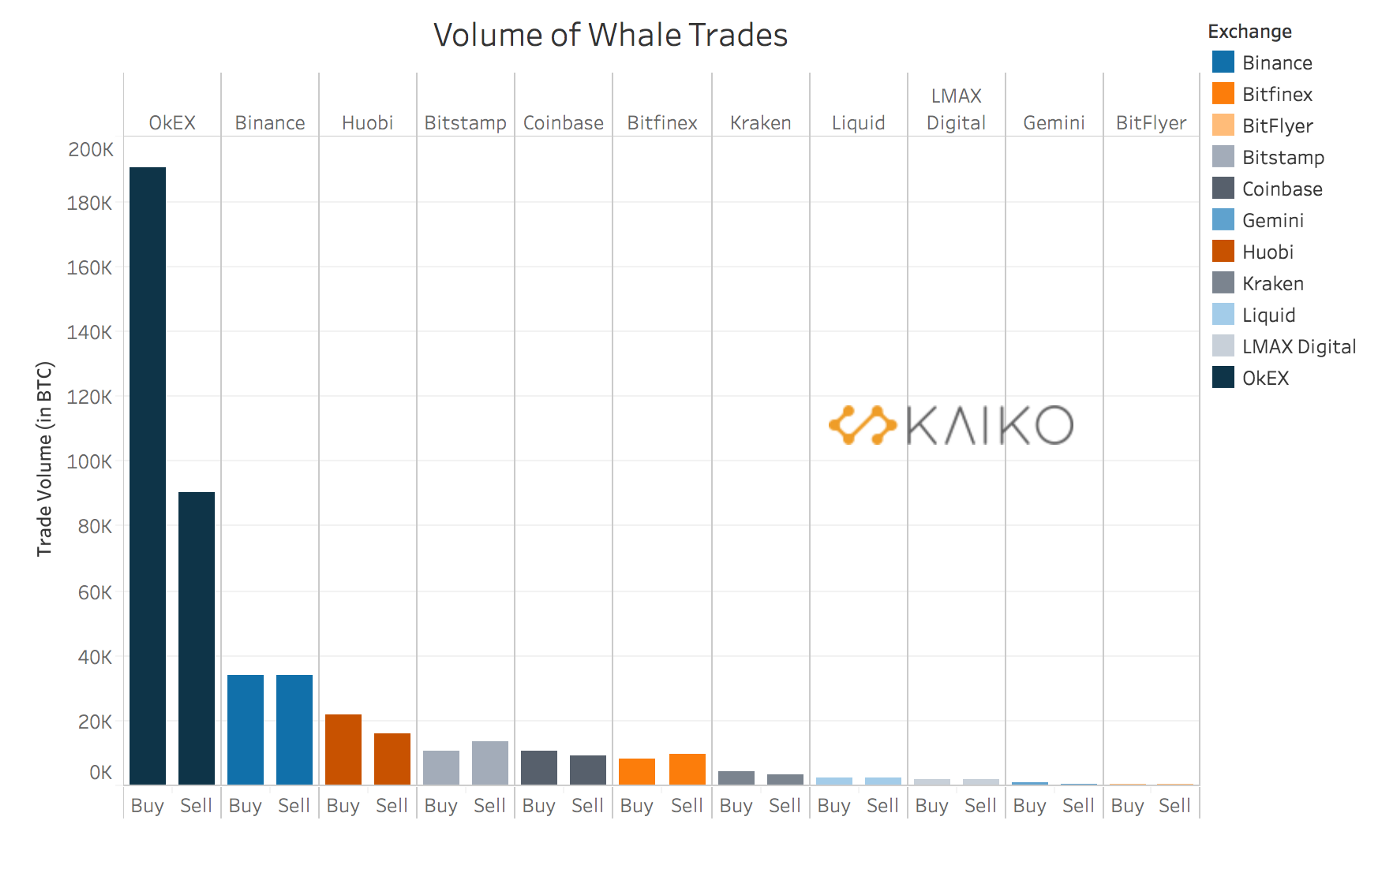 Volume of buy & sell whale Bitcoin trades (≥10 BTC) by exchange